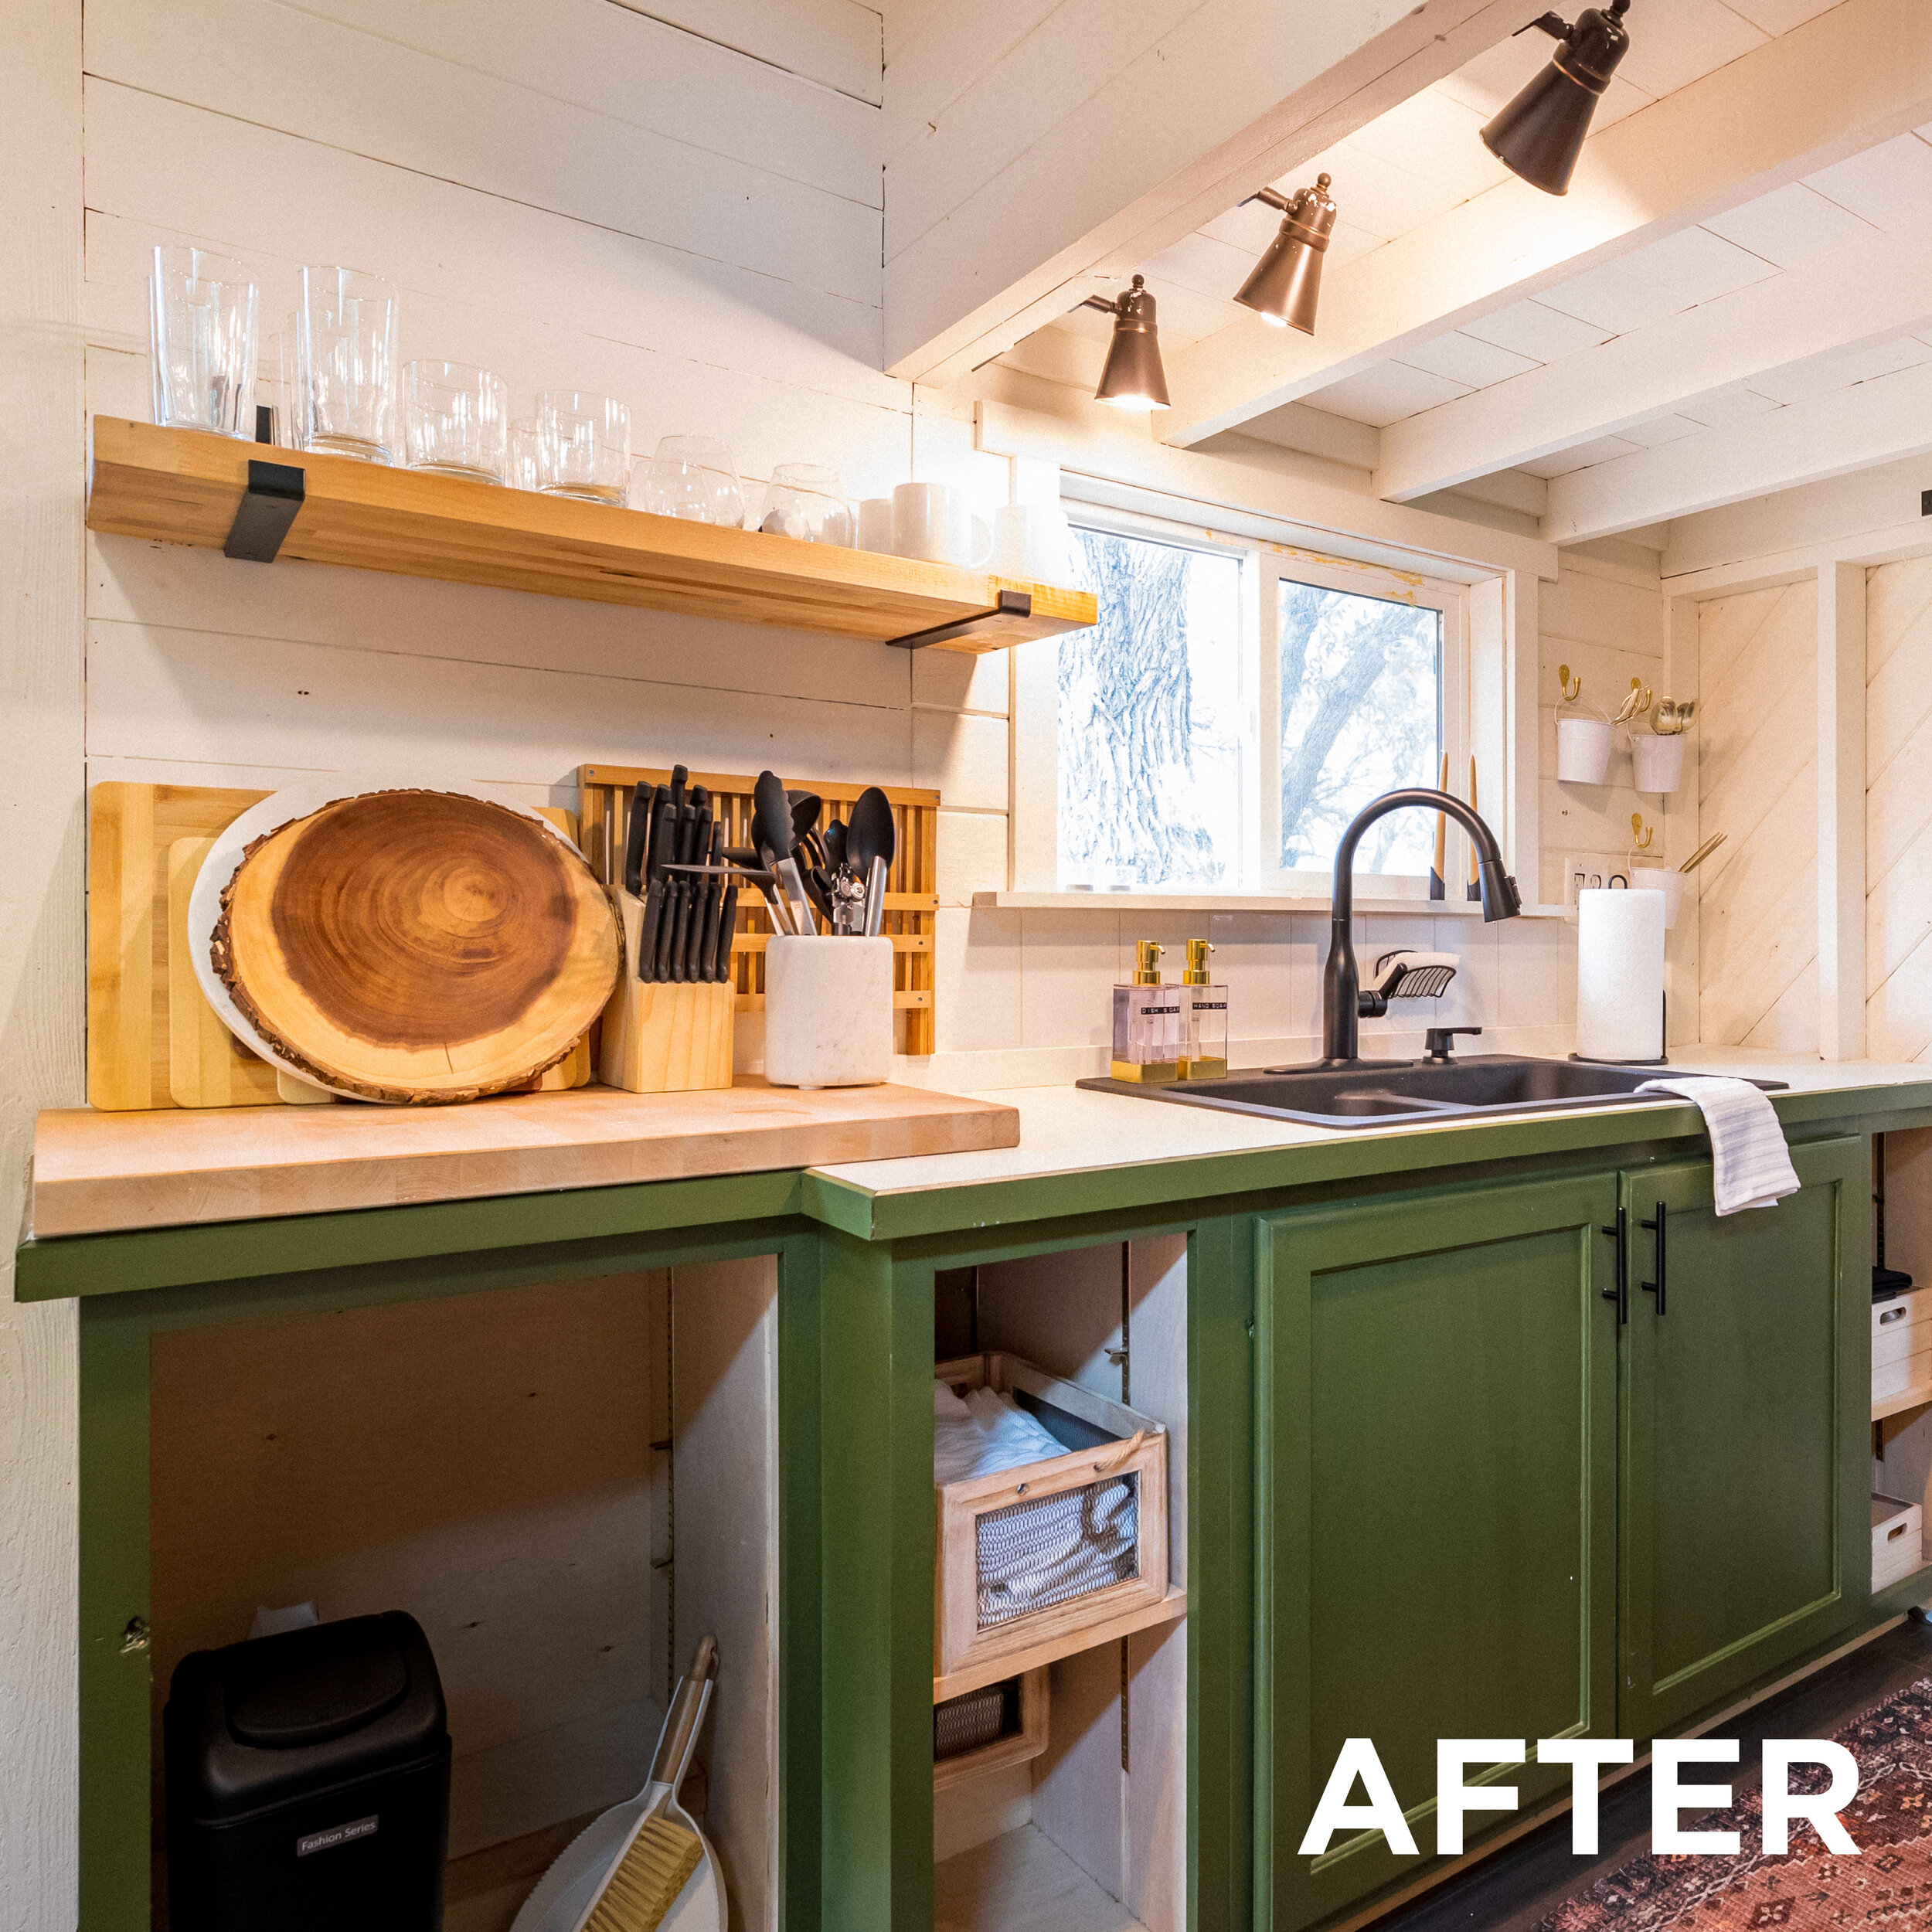 BEFORE & AFTER MARY TINY HOUSE8.jpg